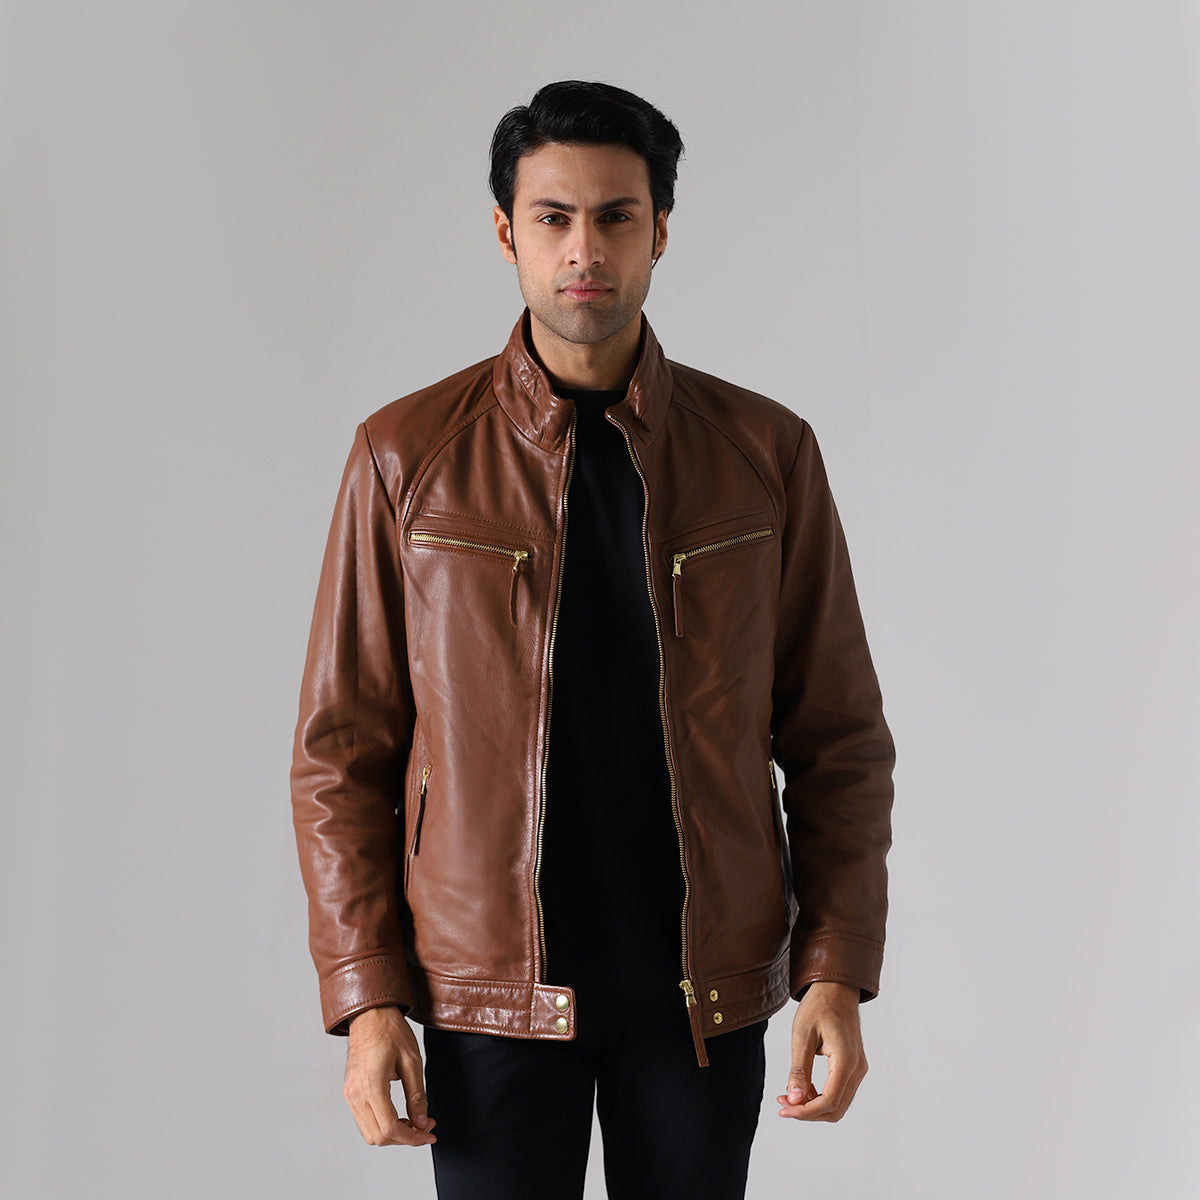 Mens Black Leather Jacket at 4000.00 INR in New Delhi | Leather House